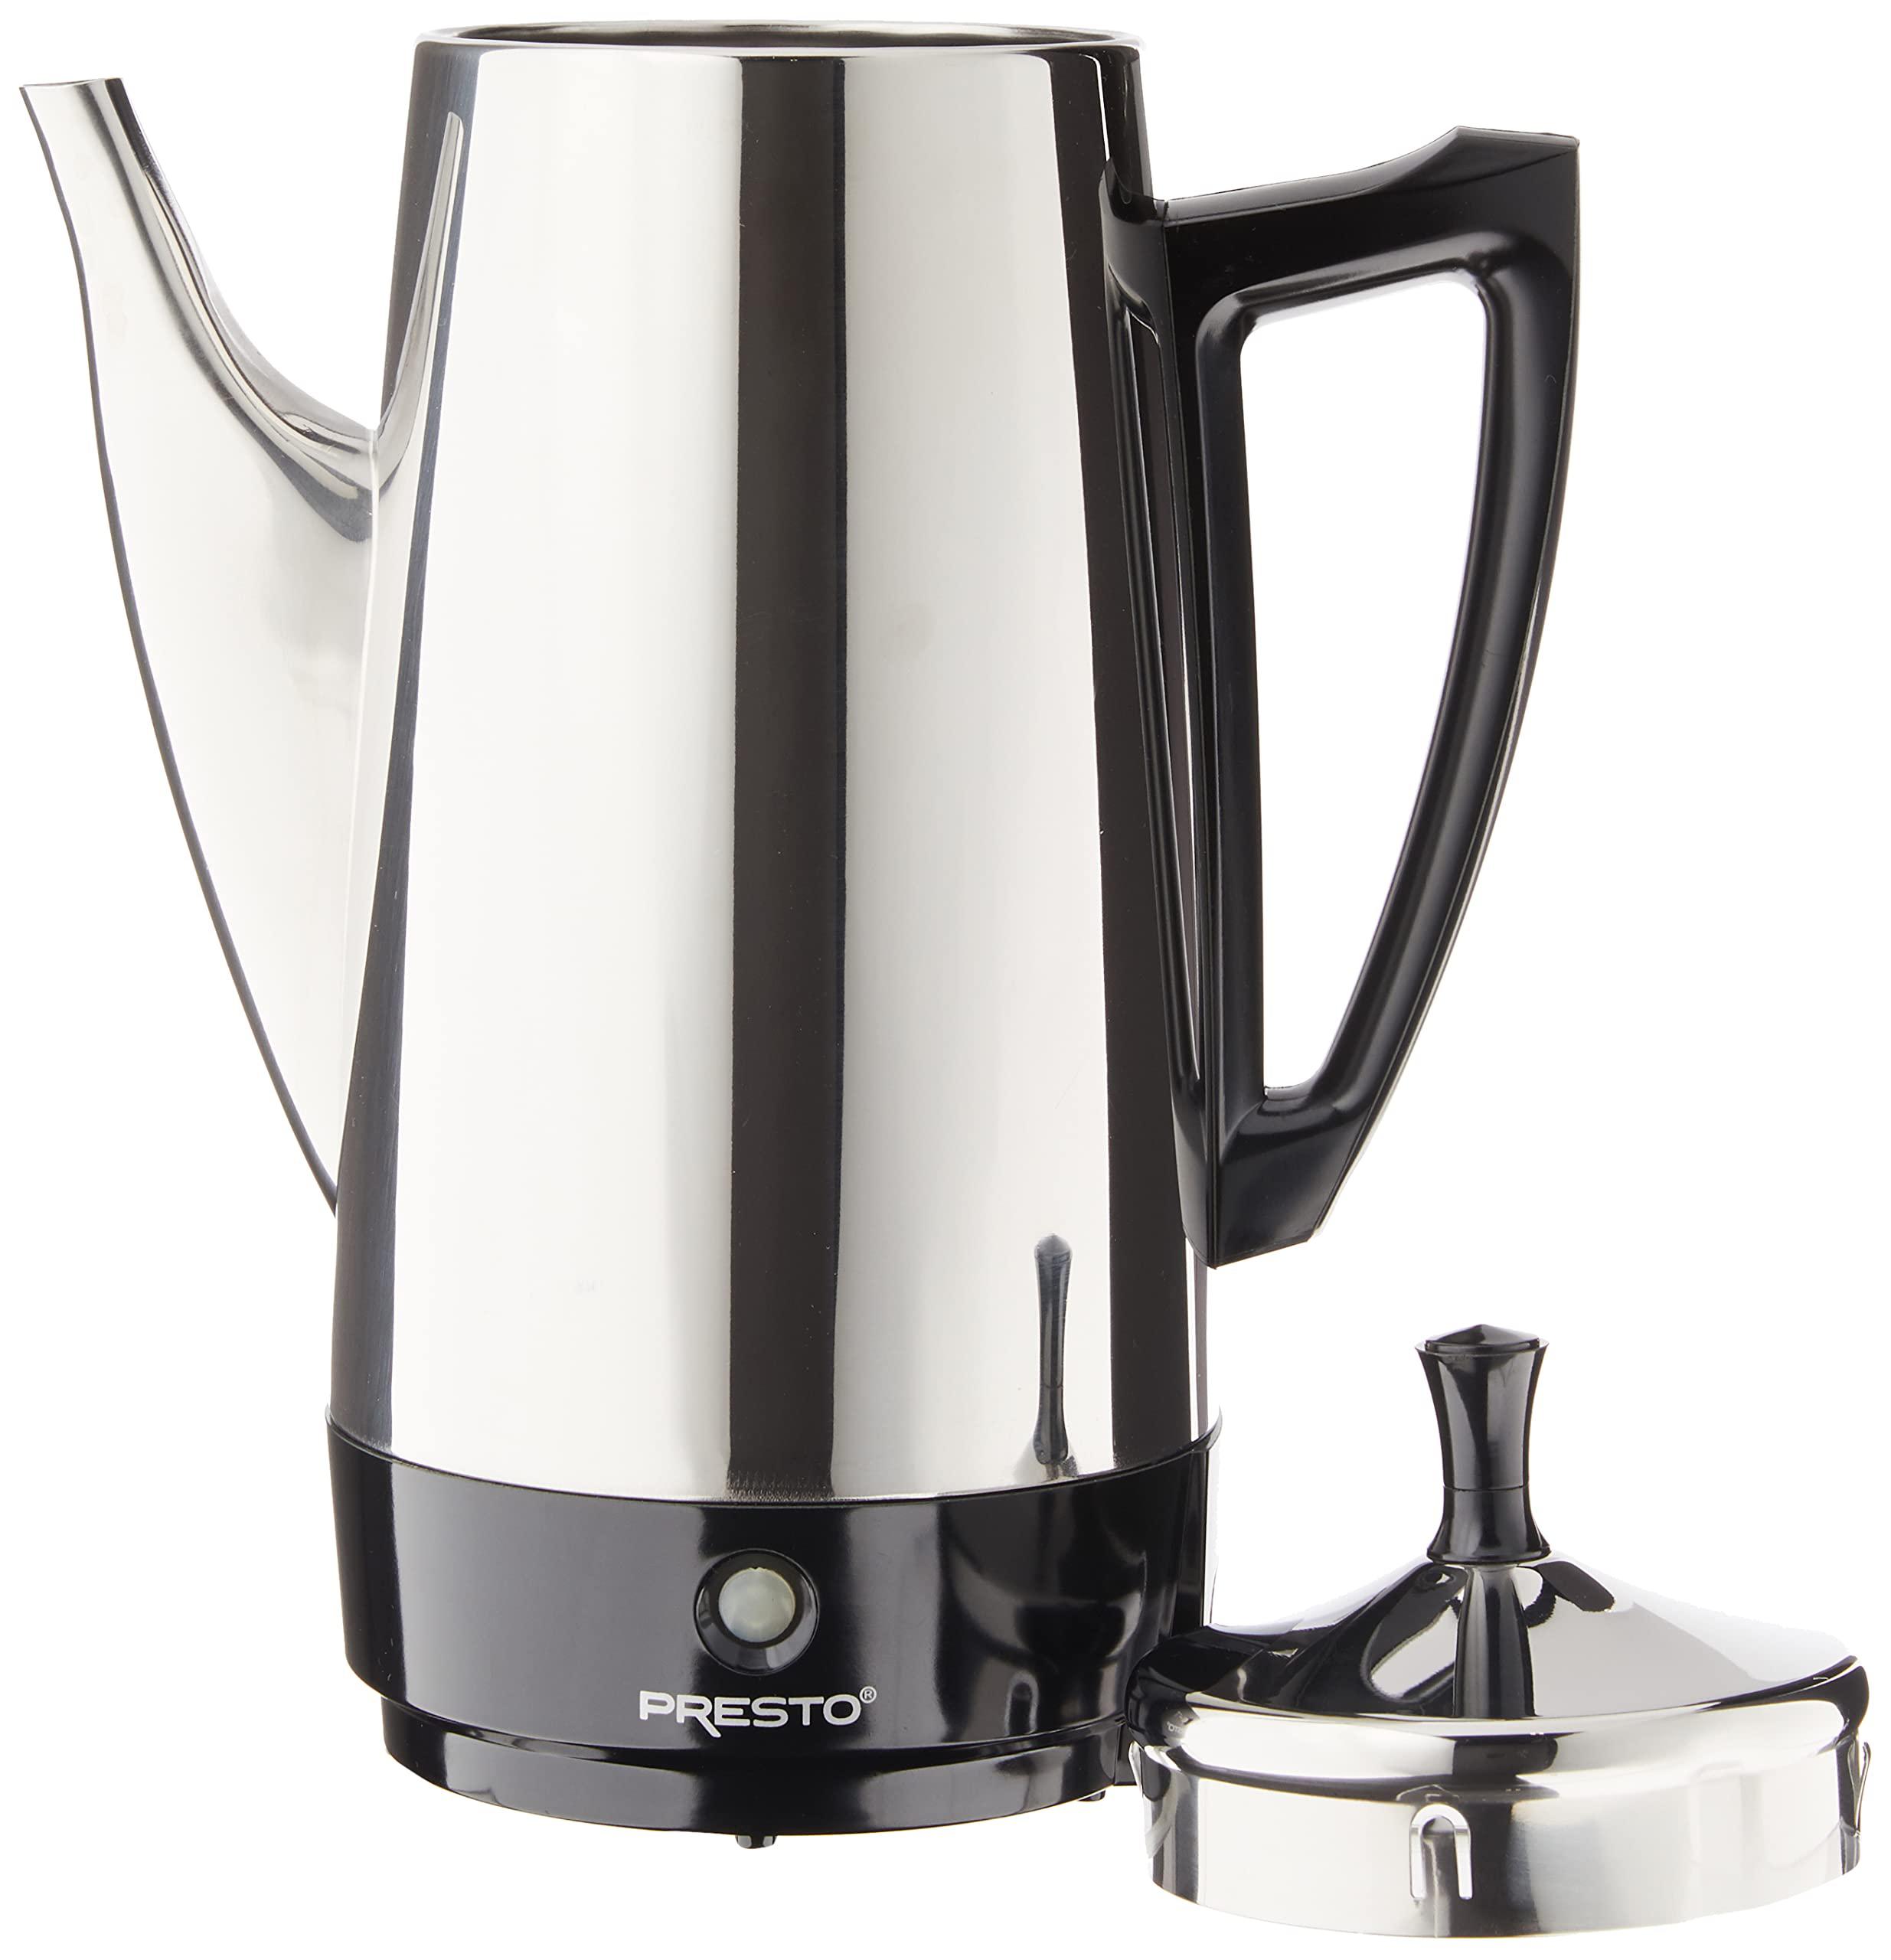 presto 02811 12-cup stainless steel coffee maker, 9.7"d x 13.1"w x 6.2"h